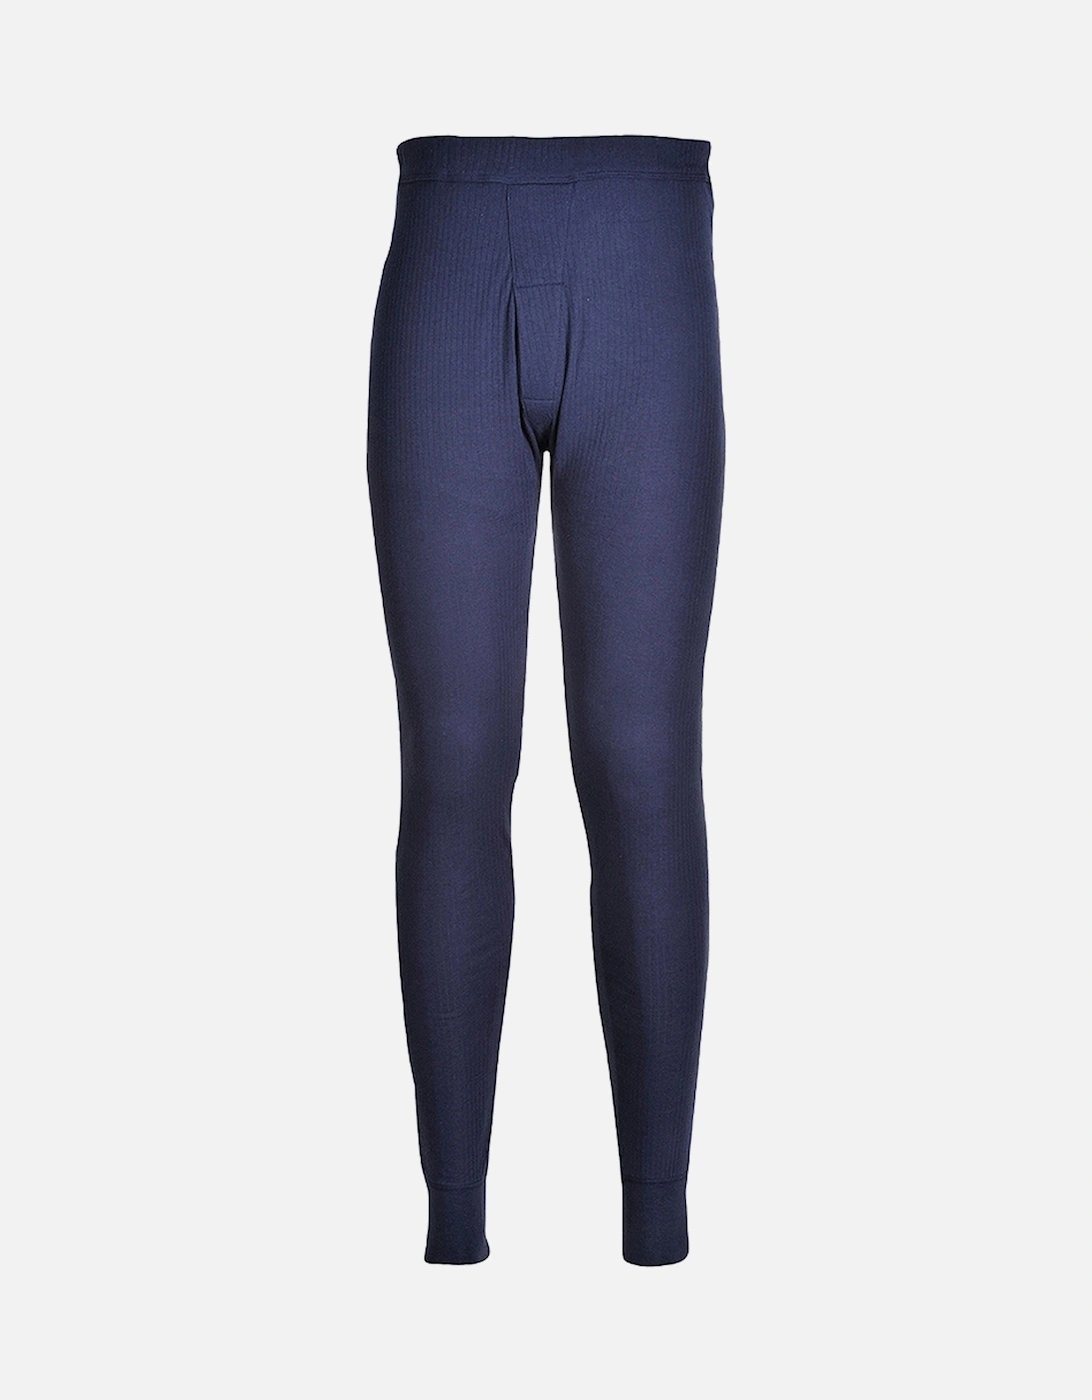 Mens Thermal Underwear Trousers (B121) / Bottoms